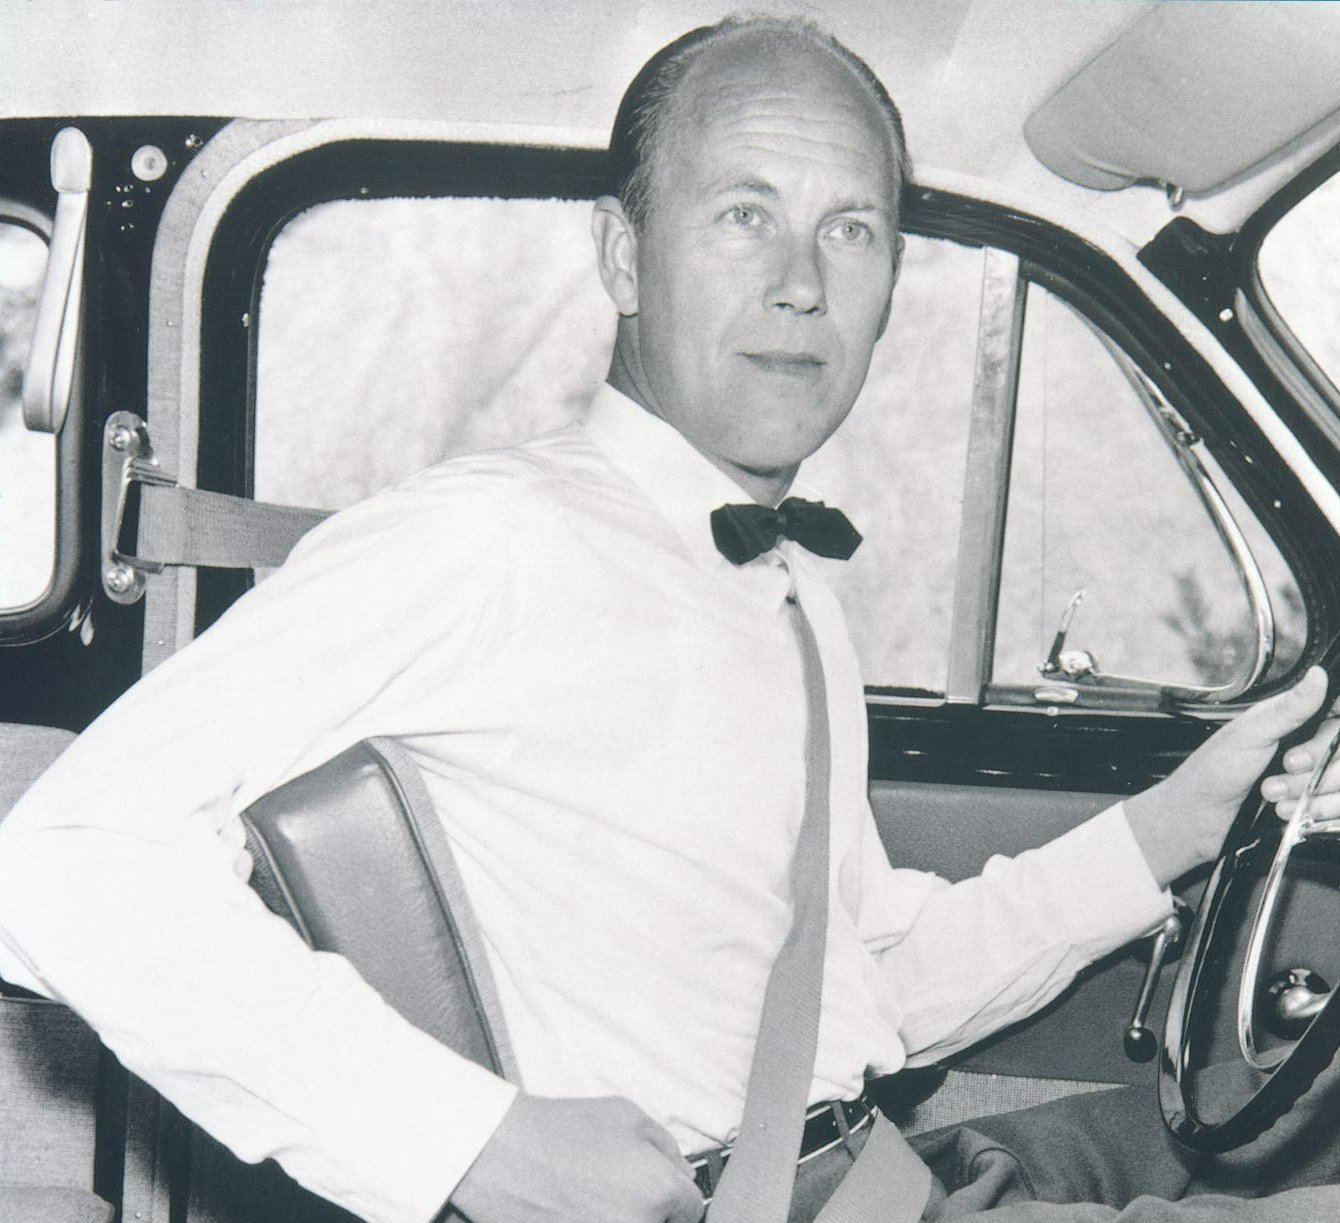 This Swedish engineer invented the three-point seatbelt; what was his name?